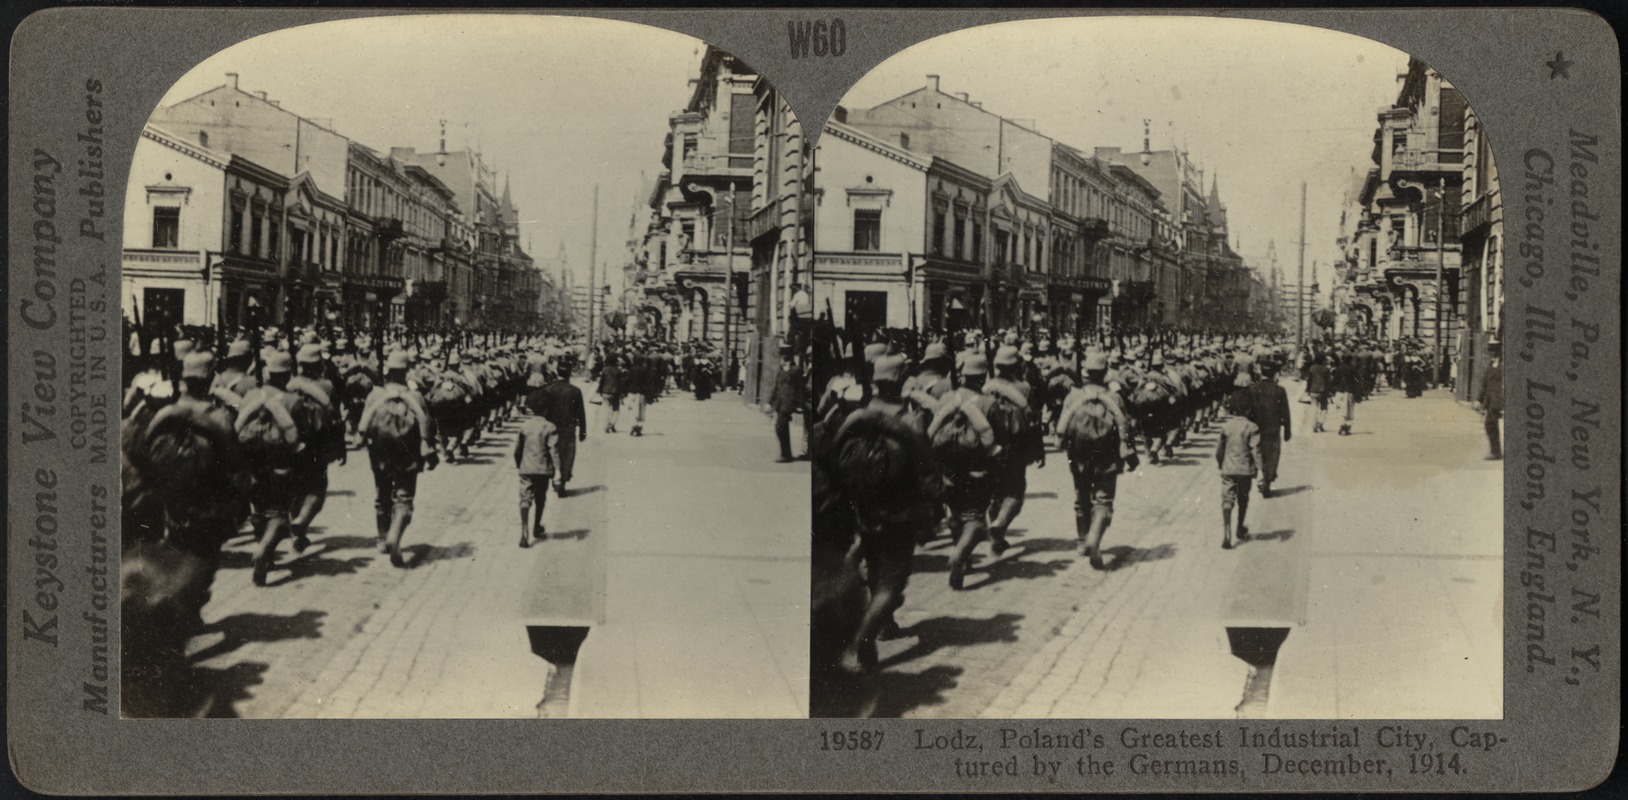 German troops marching through Lodz, Poland, after its capture from the Russians